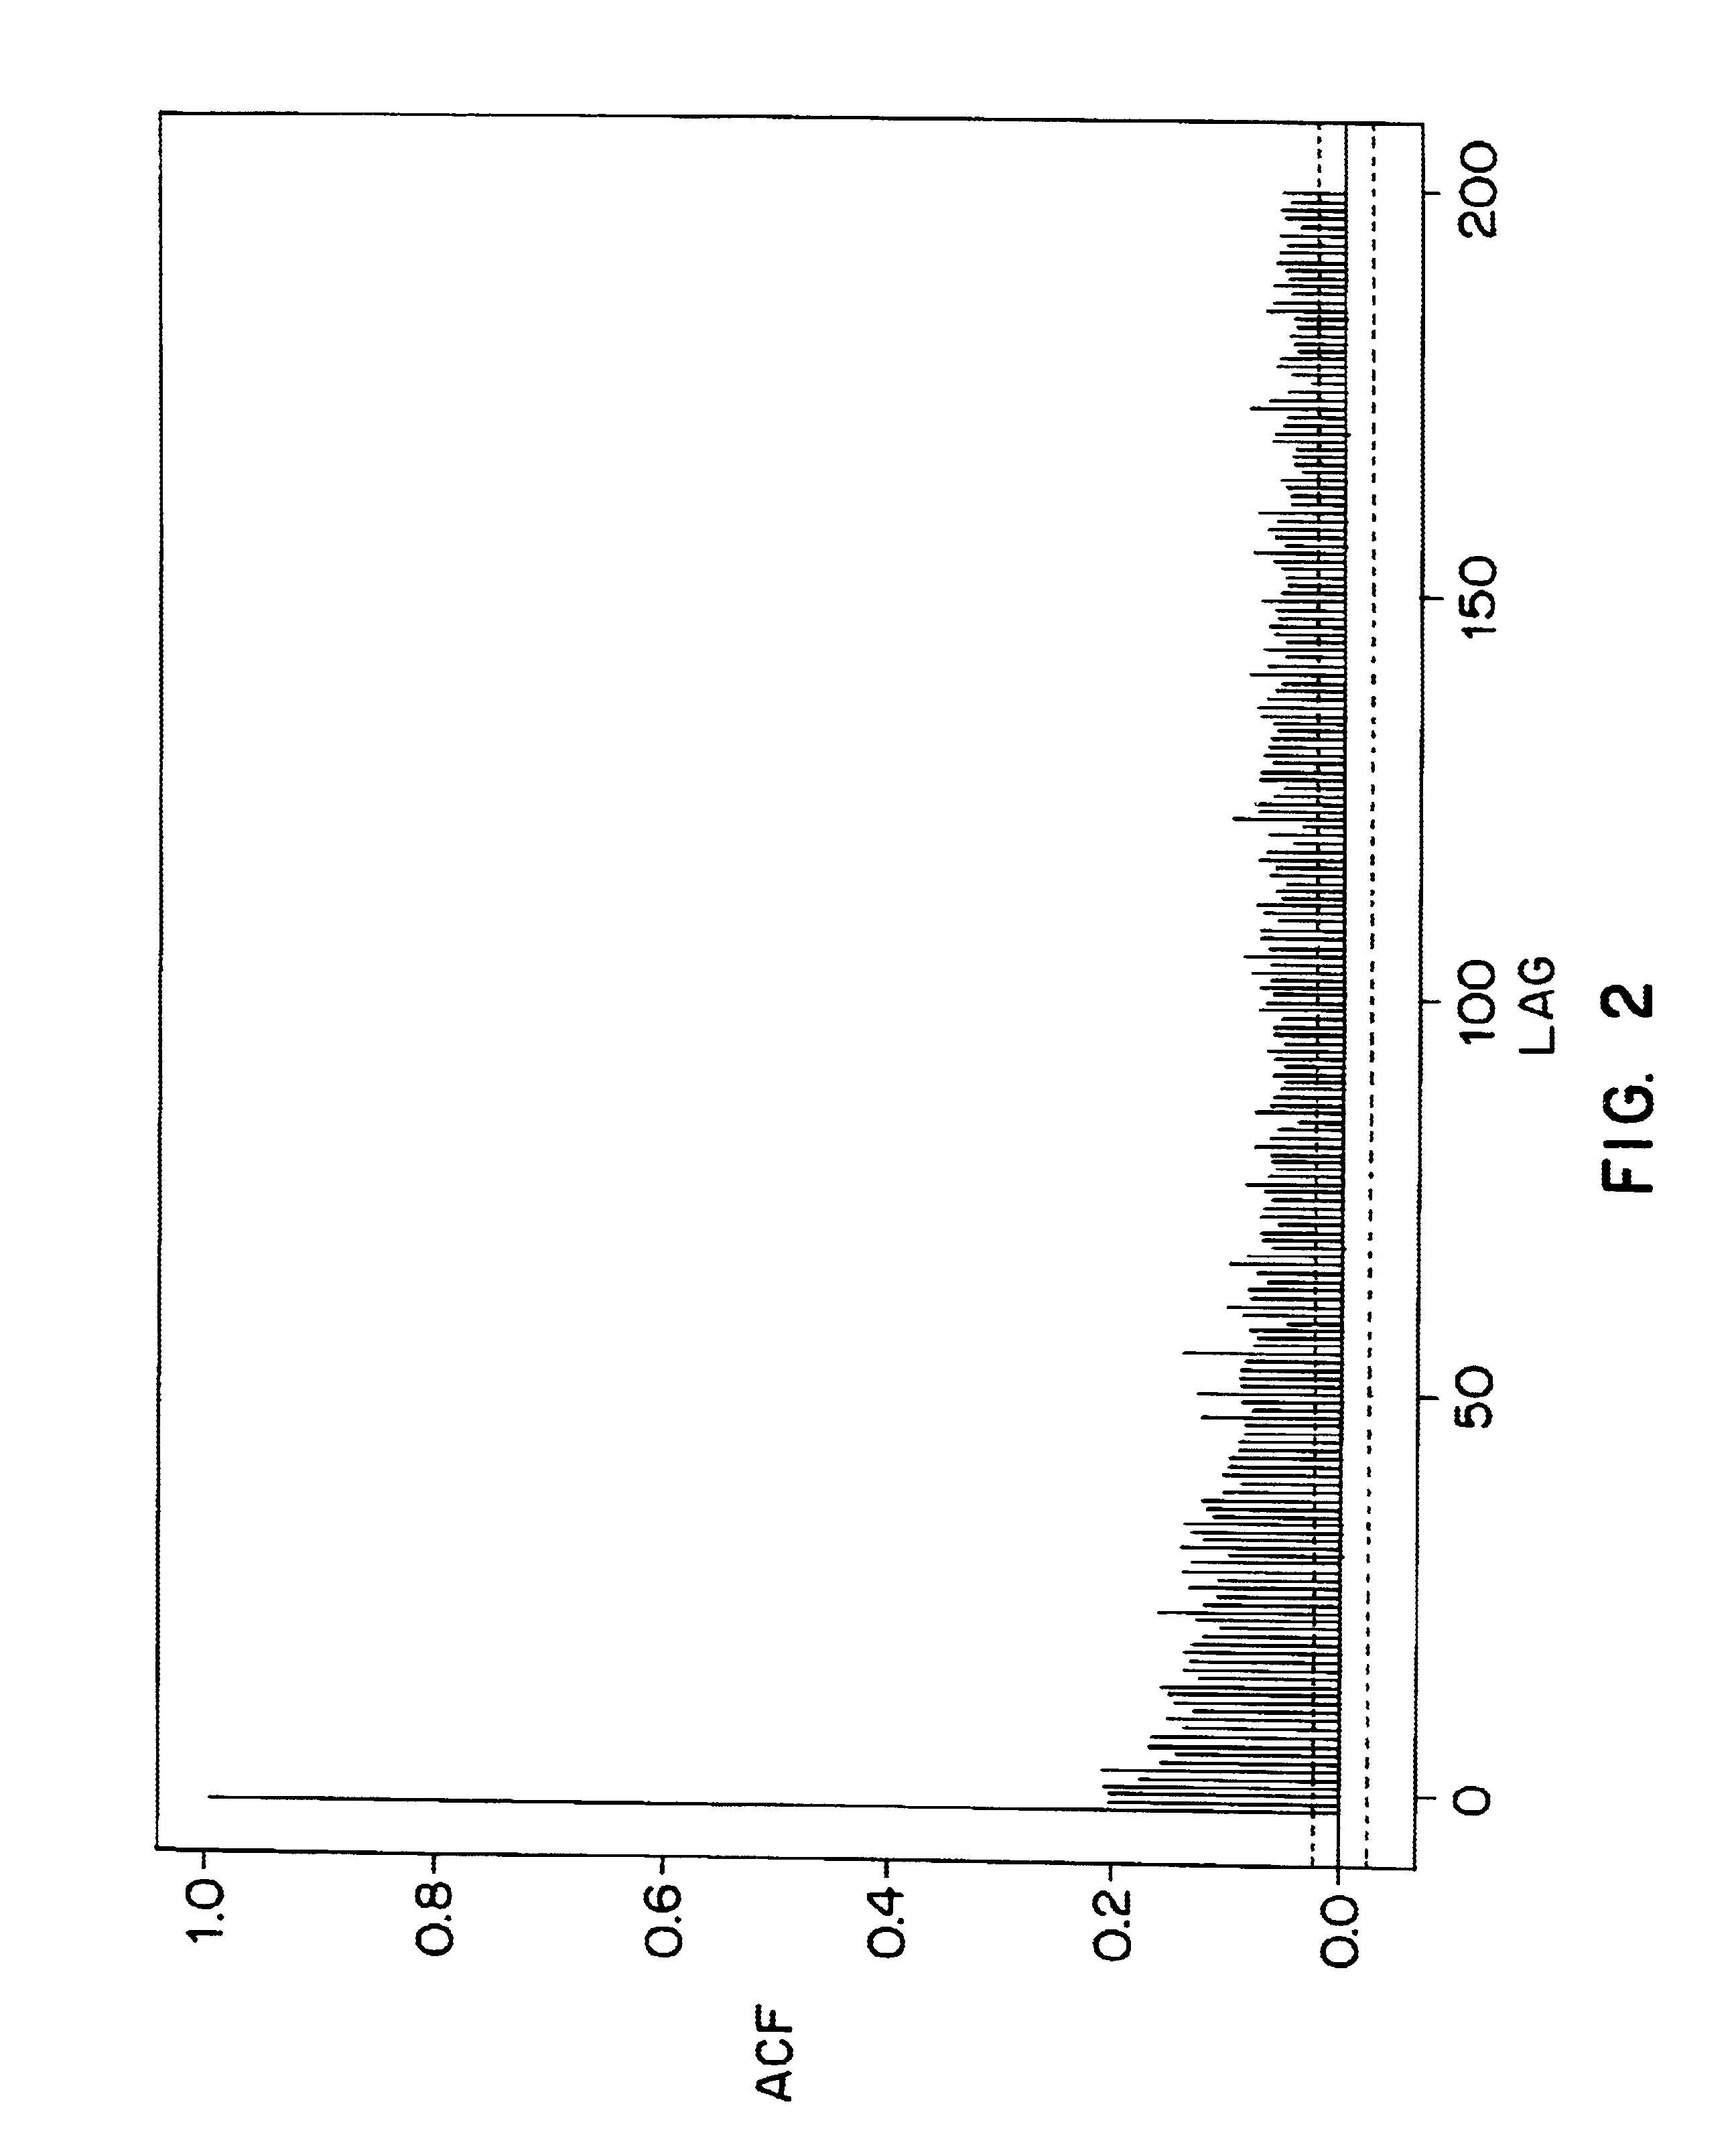 Method and system for modeling financial markets and assets using fractal activity time